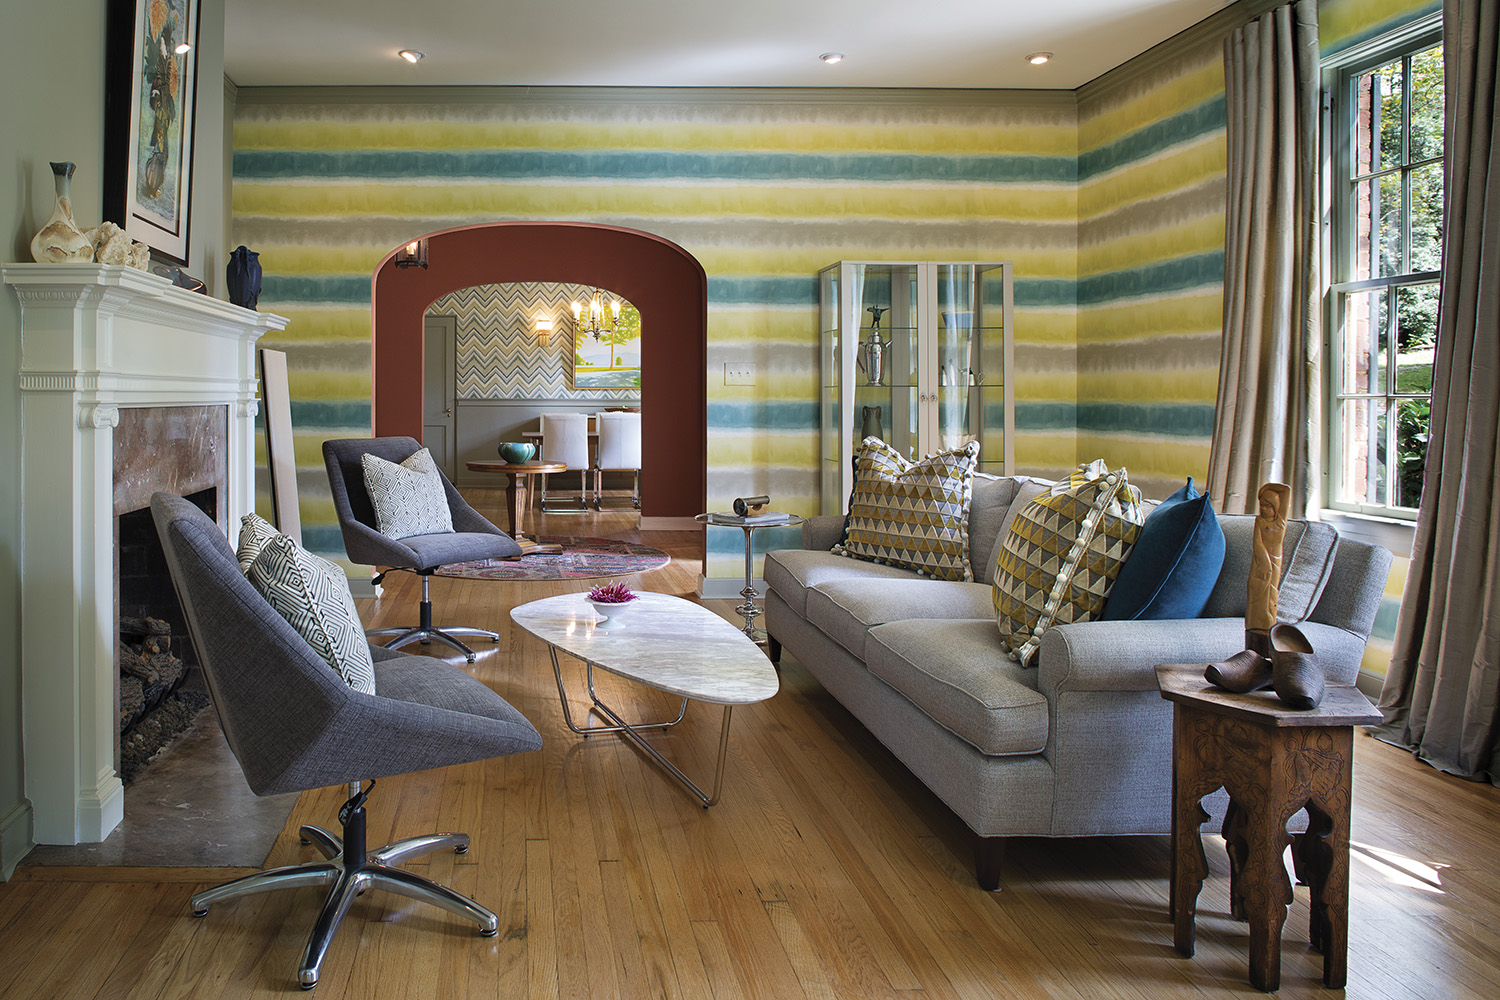 Striped wallpaper applied horizontally makes a bold statement in the living/listening room. The sofa is from Four Corners Home, the chairs and coffee table are from Mobilia; custom draperies (Libas Bhopal Silk Dupioni) and pillows (Harlequin Tessalatte) are by KWL Design & Décor. Photo by David Dietrich